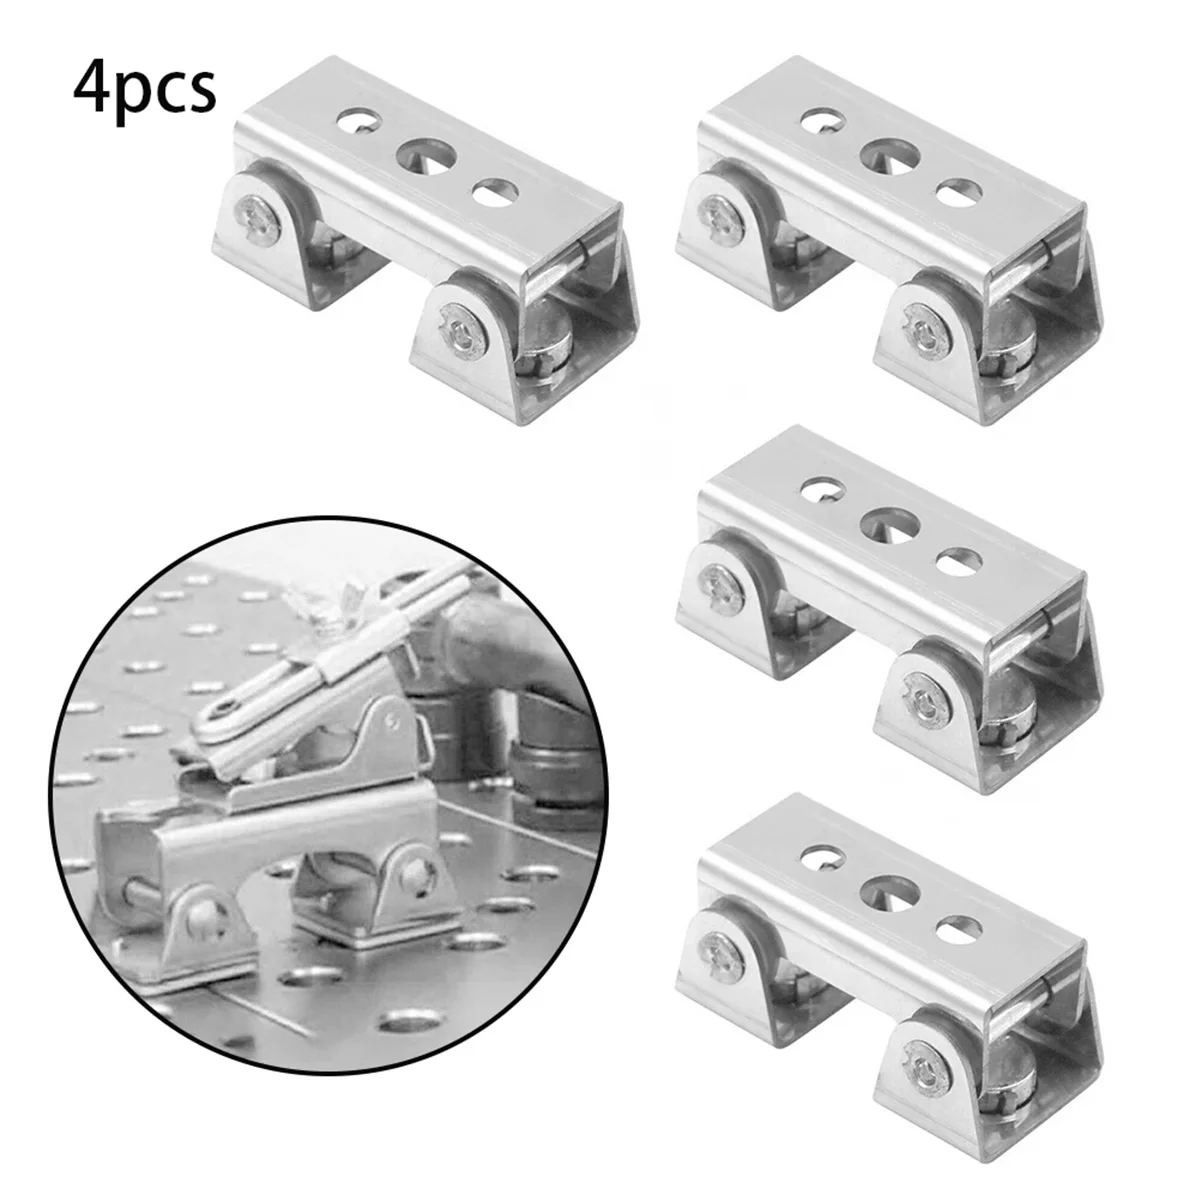 

4Pcs V Type Welding Jig Adjustable Magnetic Welding Clamps V Pads Fixture Holder Strong Welder Hand Tool Aids Clamping Boom